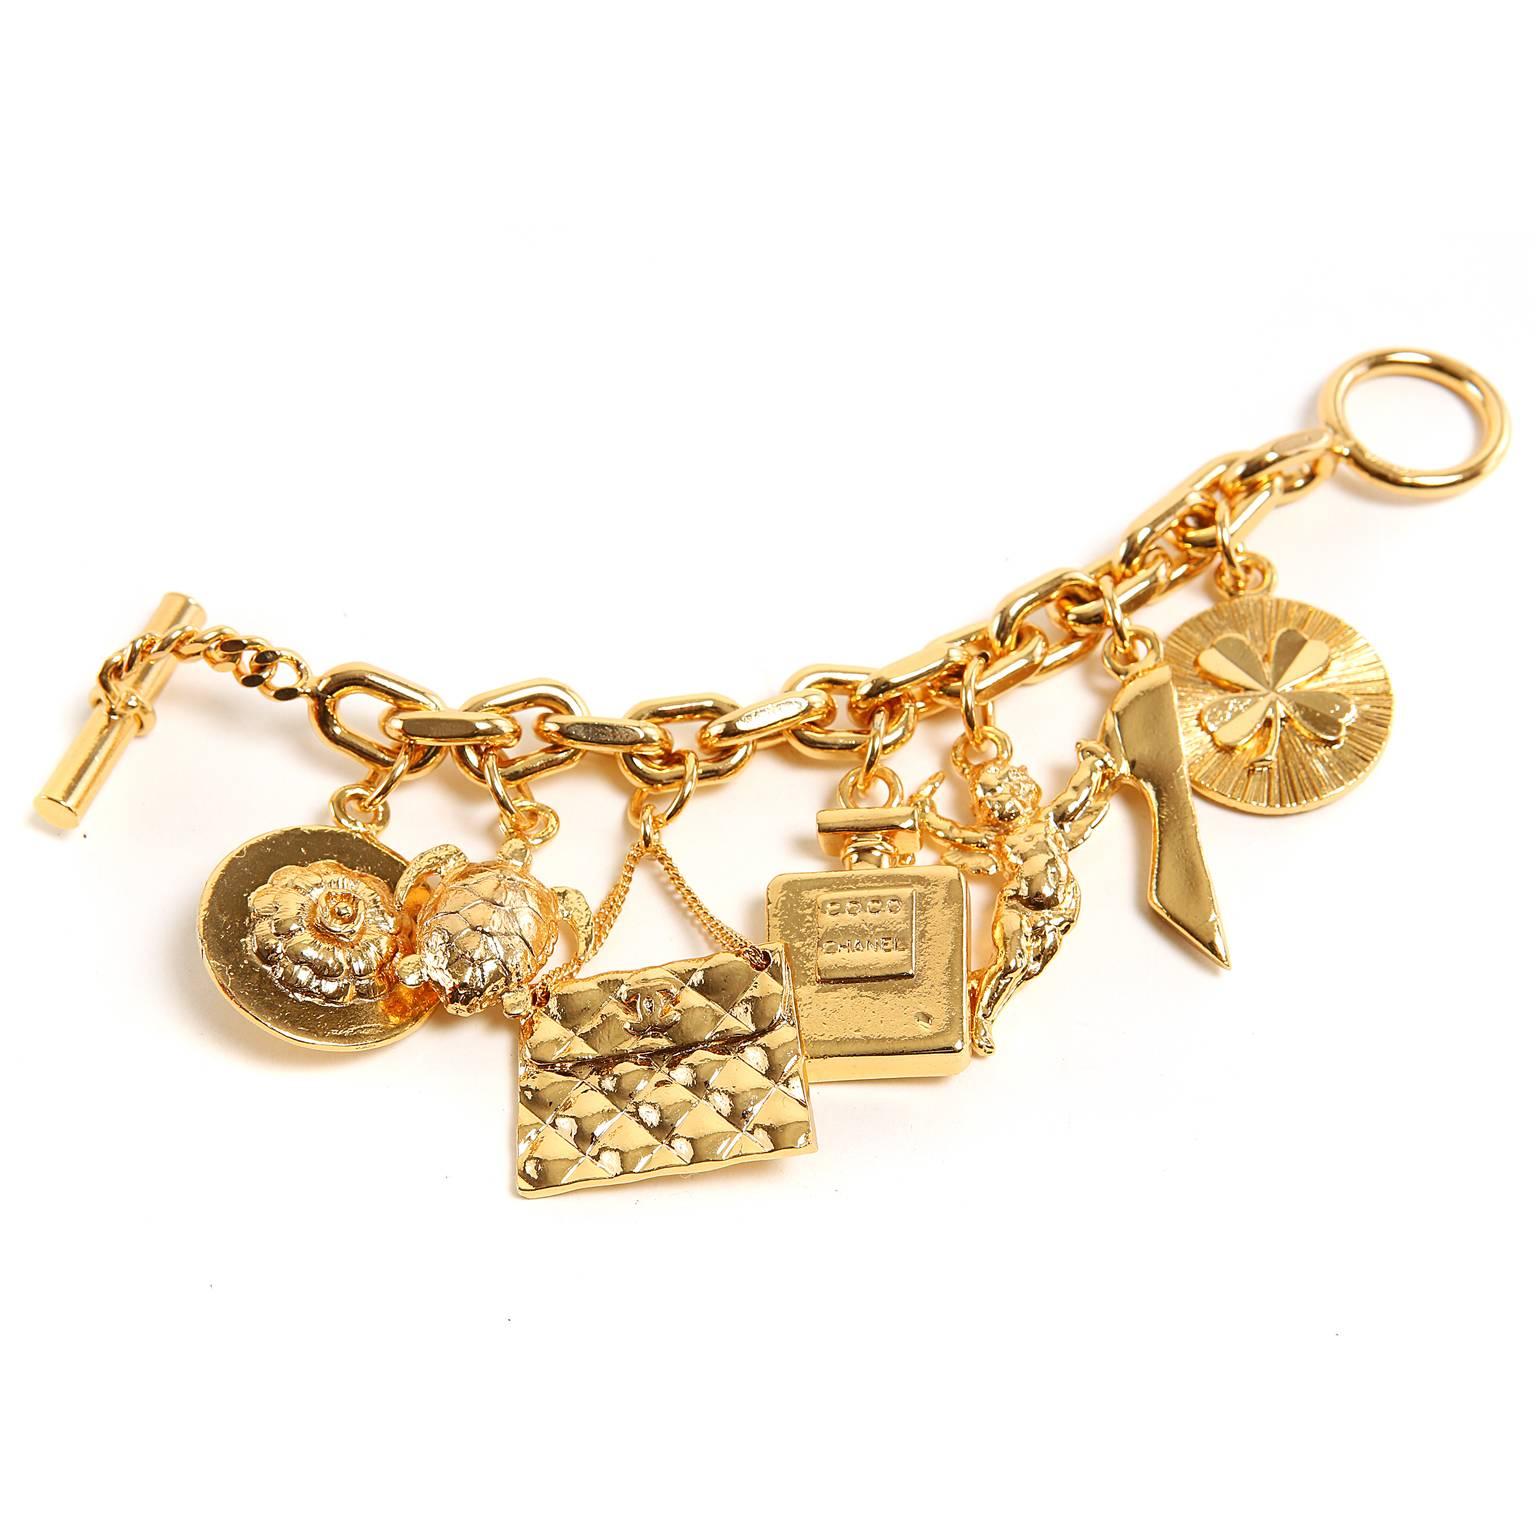 Chanel Vintage Gold Charm Bracelet is an amazing find in excellent plus condition.  The perfect gift for the Chanel lover in your life (even yourself). 
 
Gold tone link bracelet has seven dangling Chanel iconic charms:  purse, shoe, turtle,